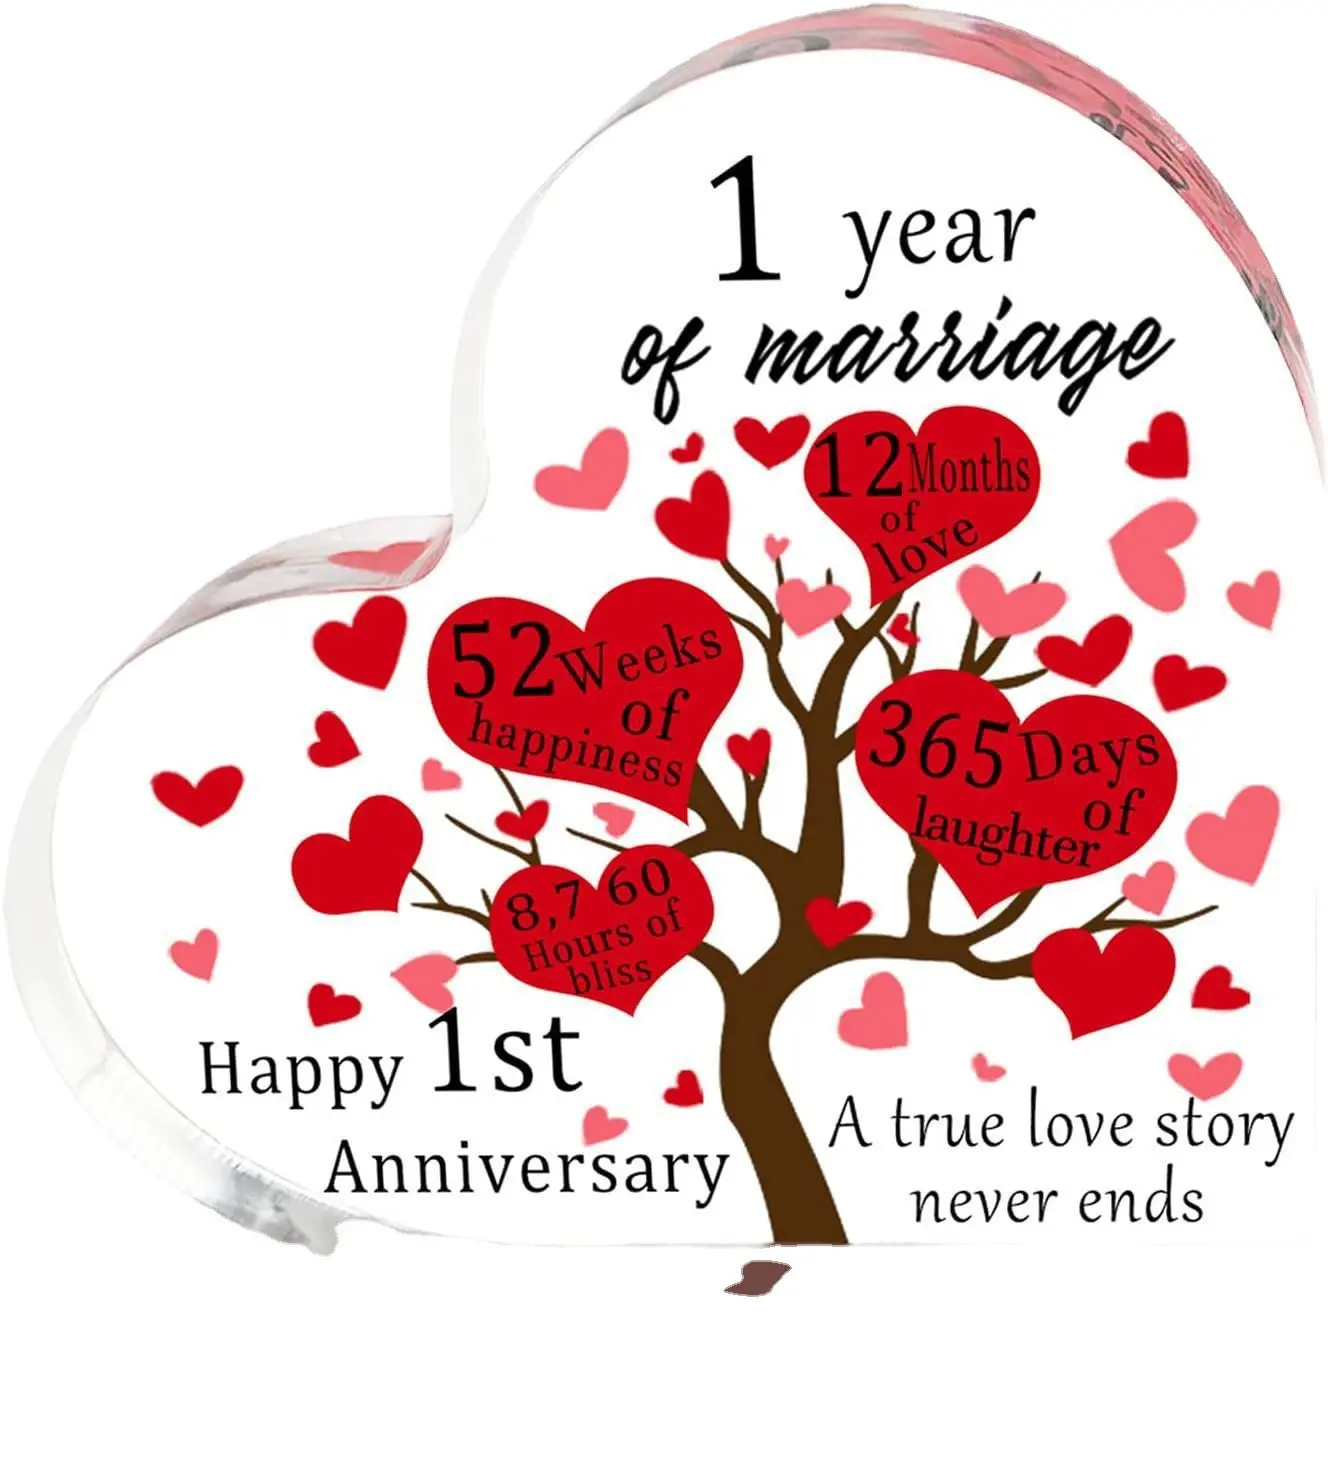 Acrylic Marriage Anniversary Clear Heart Paperweight Christmas Gifts Keepsake Wedding Gifts for Couple